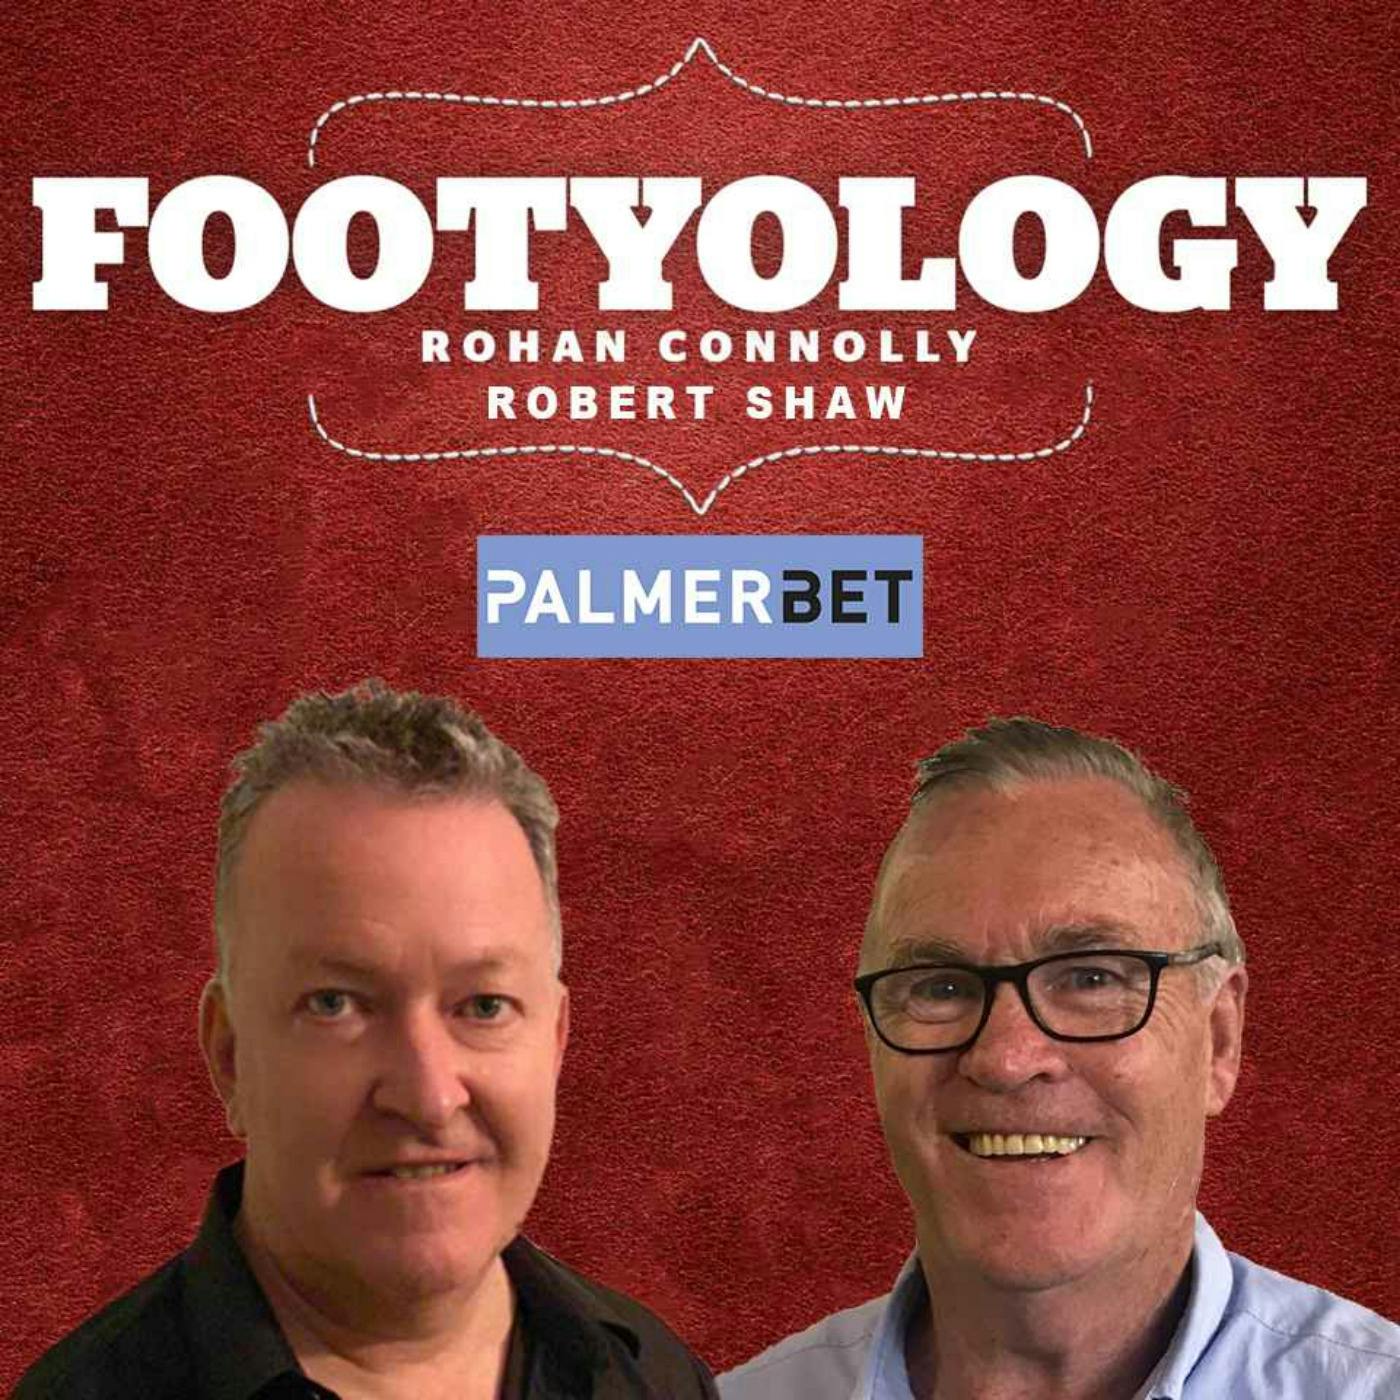 Footyology Podcast - June 19th 2022